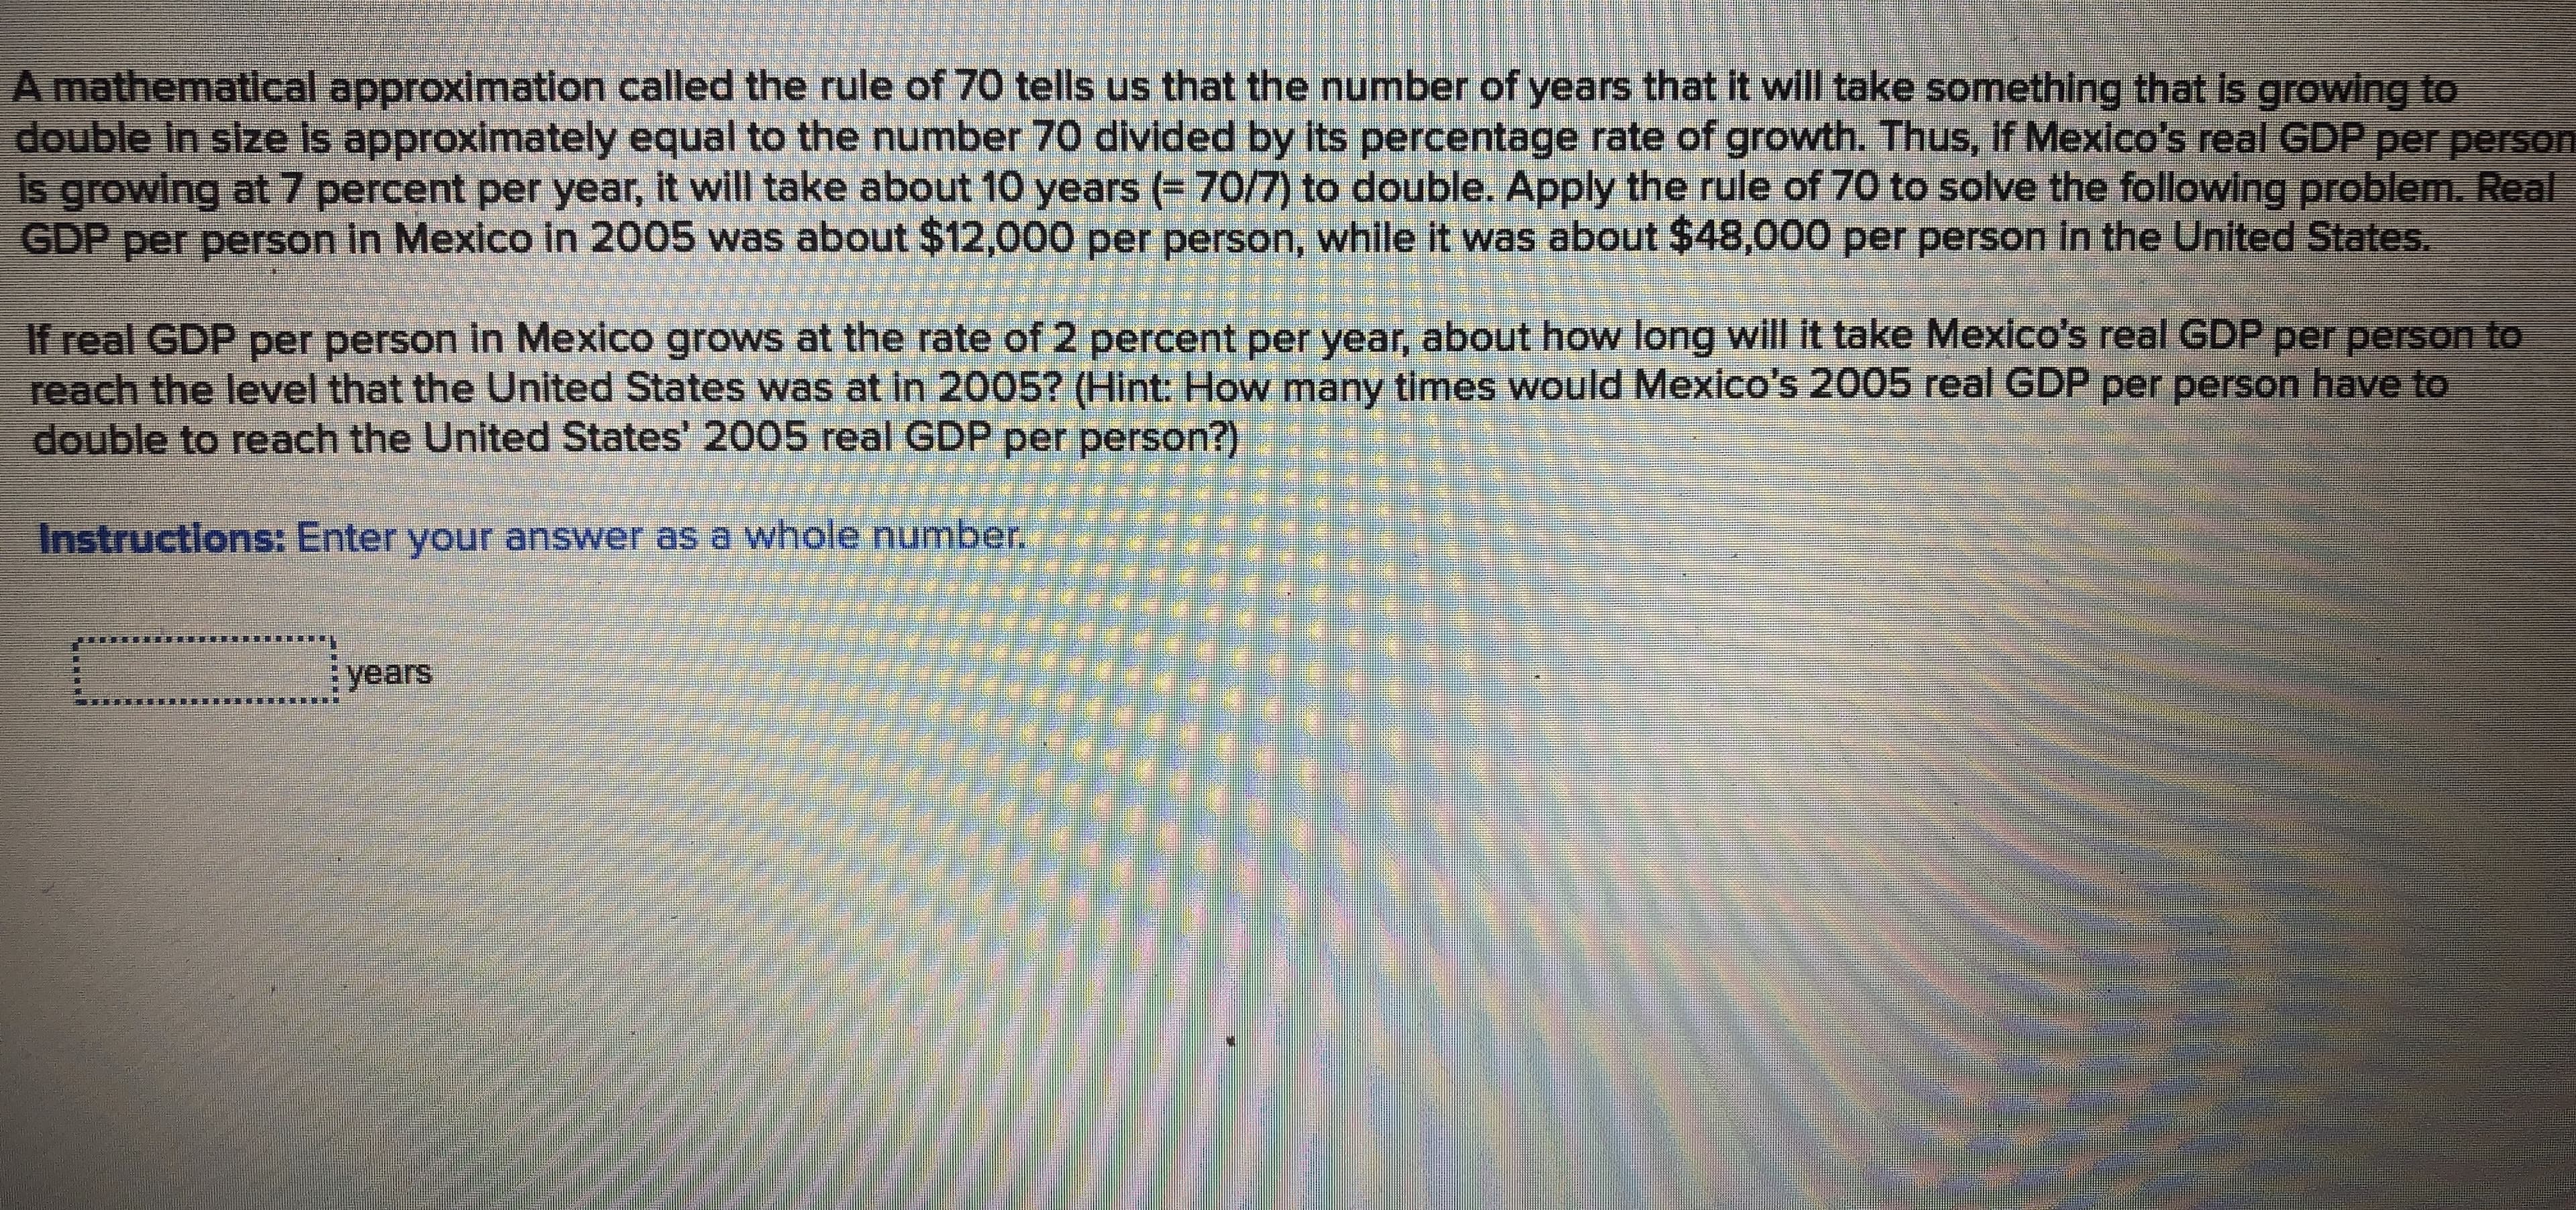 A mathematical approximation called the rule of 70 tells us that the number of years that it will take something that is growing to
double in size is approximately equal to the number 70 divided by its percentage rate of growth. Thus, If Mexico's real GDP per person
is growing at 7 percent per year, it will take about 10 years (= 70/7) to double. Apply the rule of 70 to solve the following problem. Real
GDP per person in Mexico in 2005 was about $12,000 per person, while it was about $48,000 per person in the United States.
